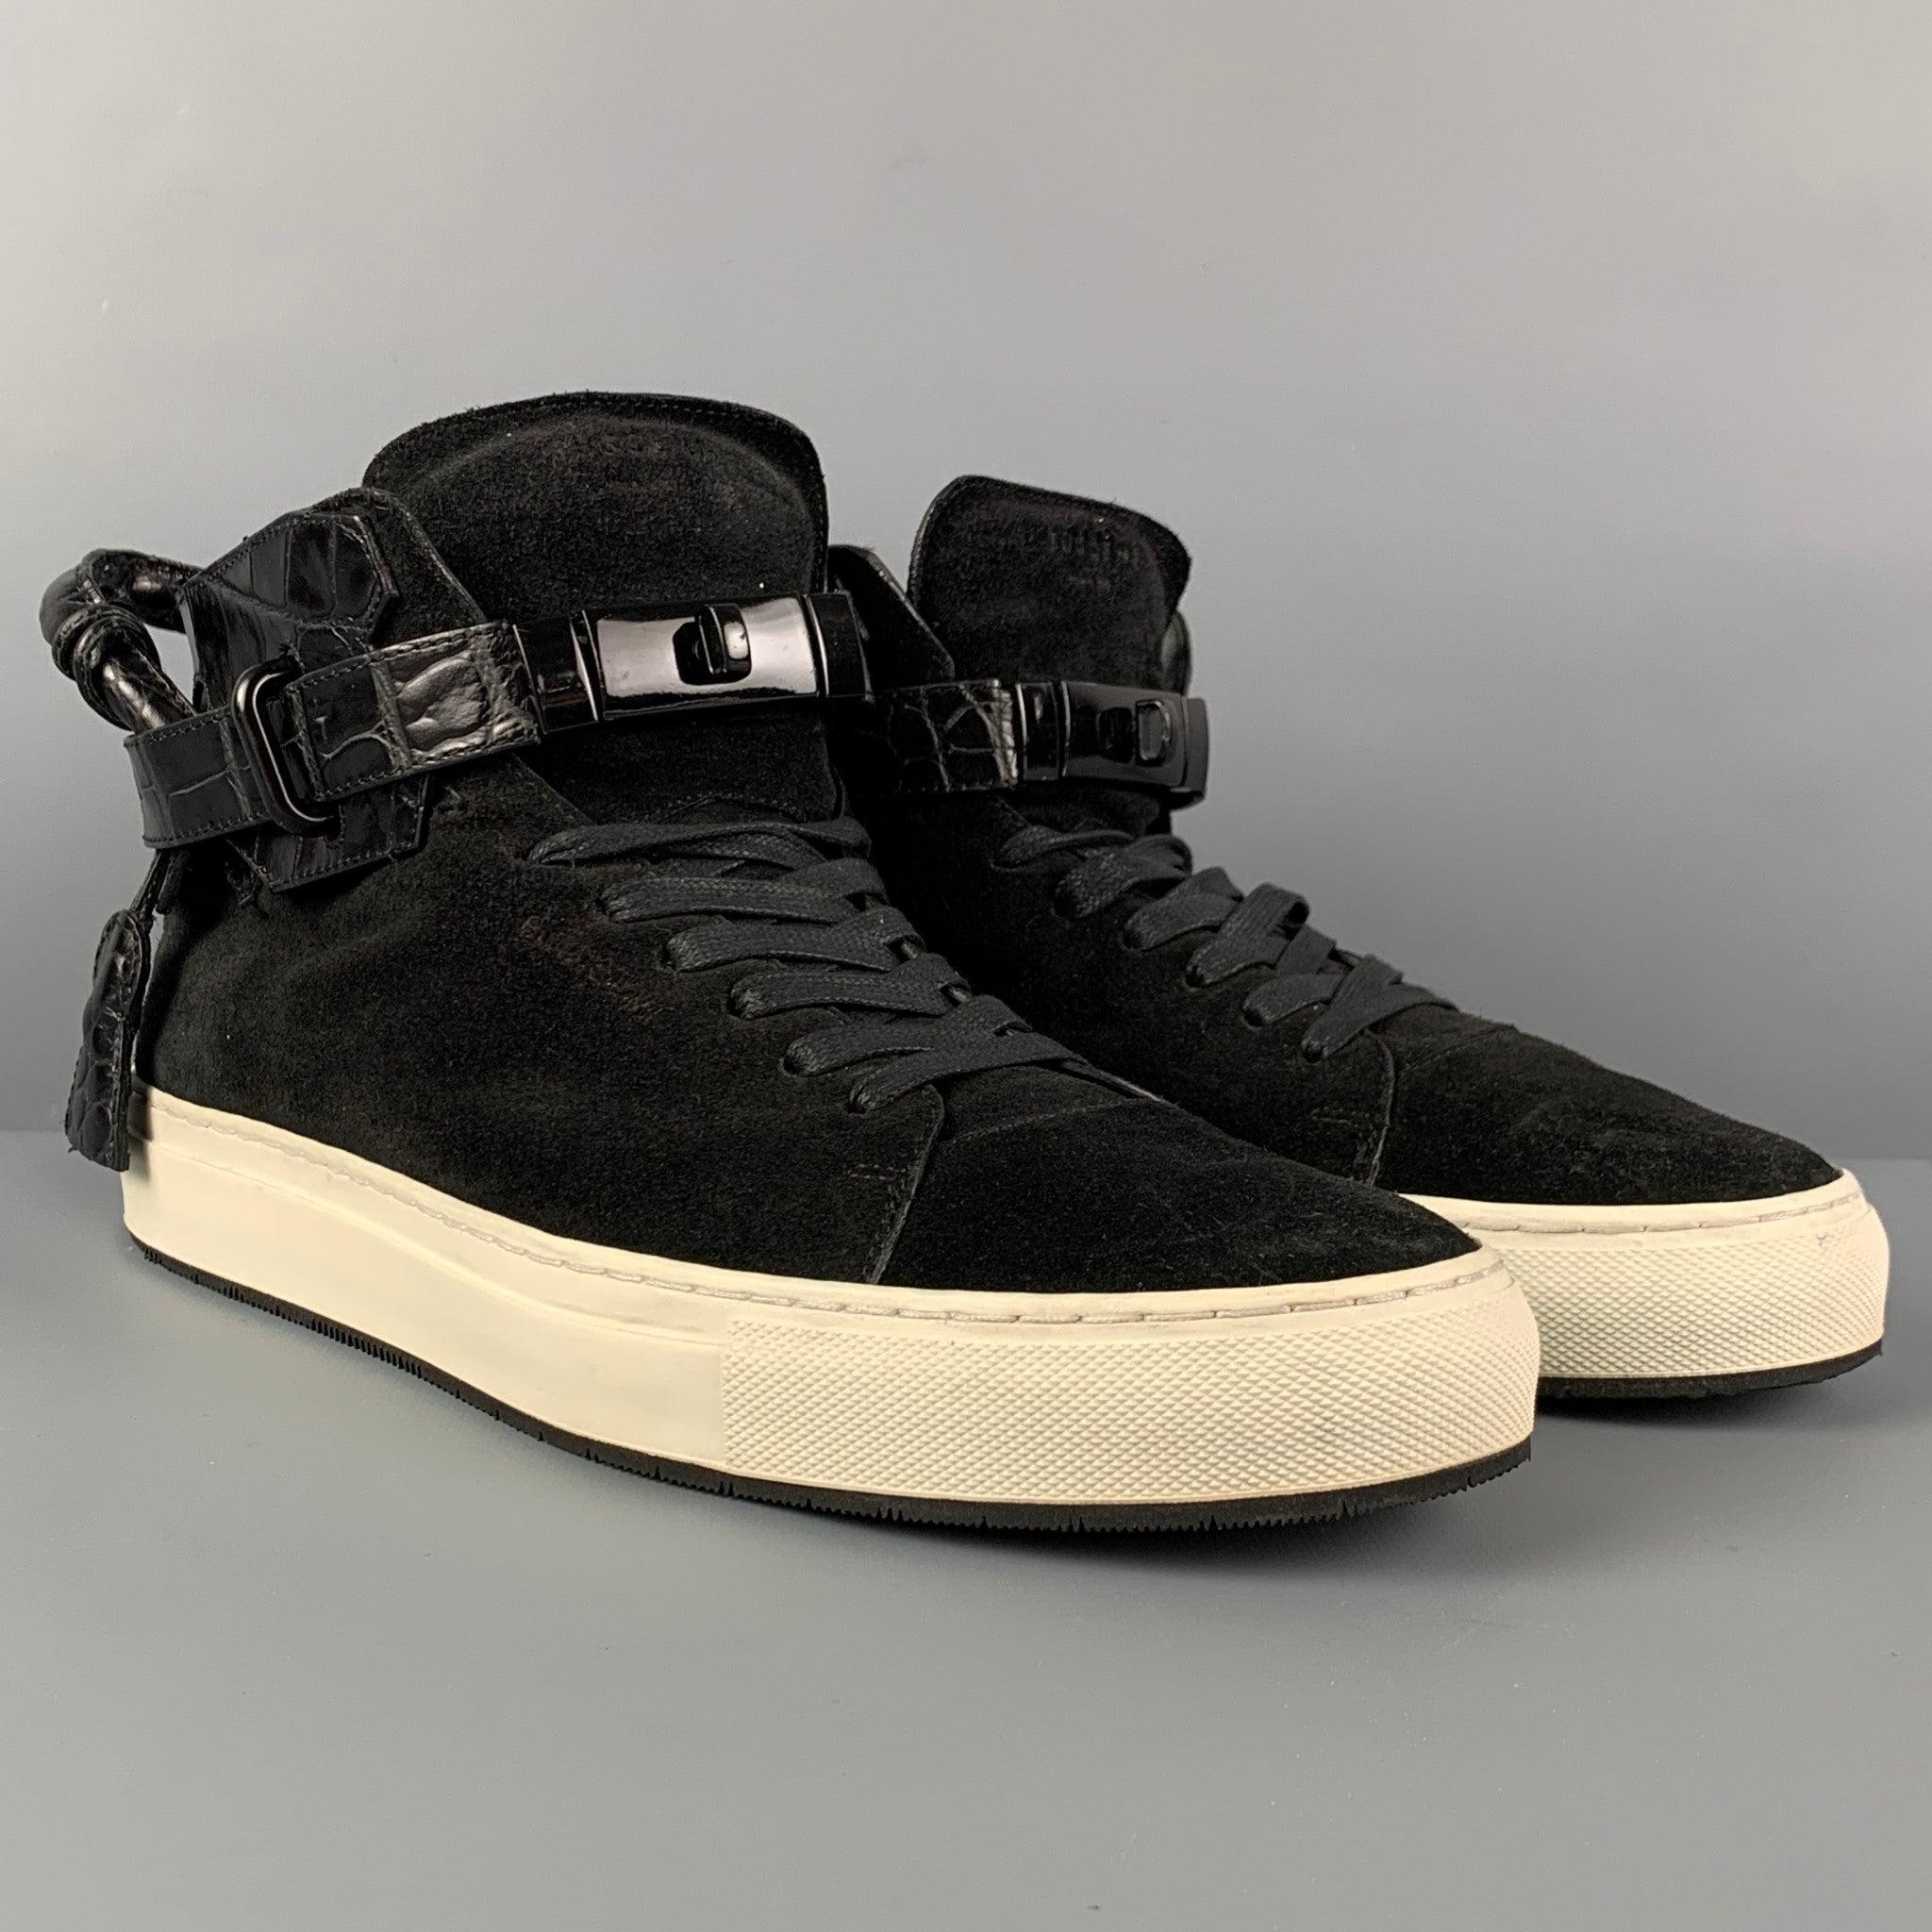 BUSCEMI '100MM' sneakers comes in a black suede with a embossed leather panel featuring a high-top style, signature heel handle, and a 3-piece mechanical closure. Missing lock detail. Made in Italy.
Very Good
Pre-Owned Condition. As-Is.  

Marked:  